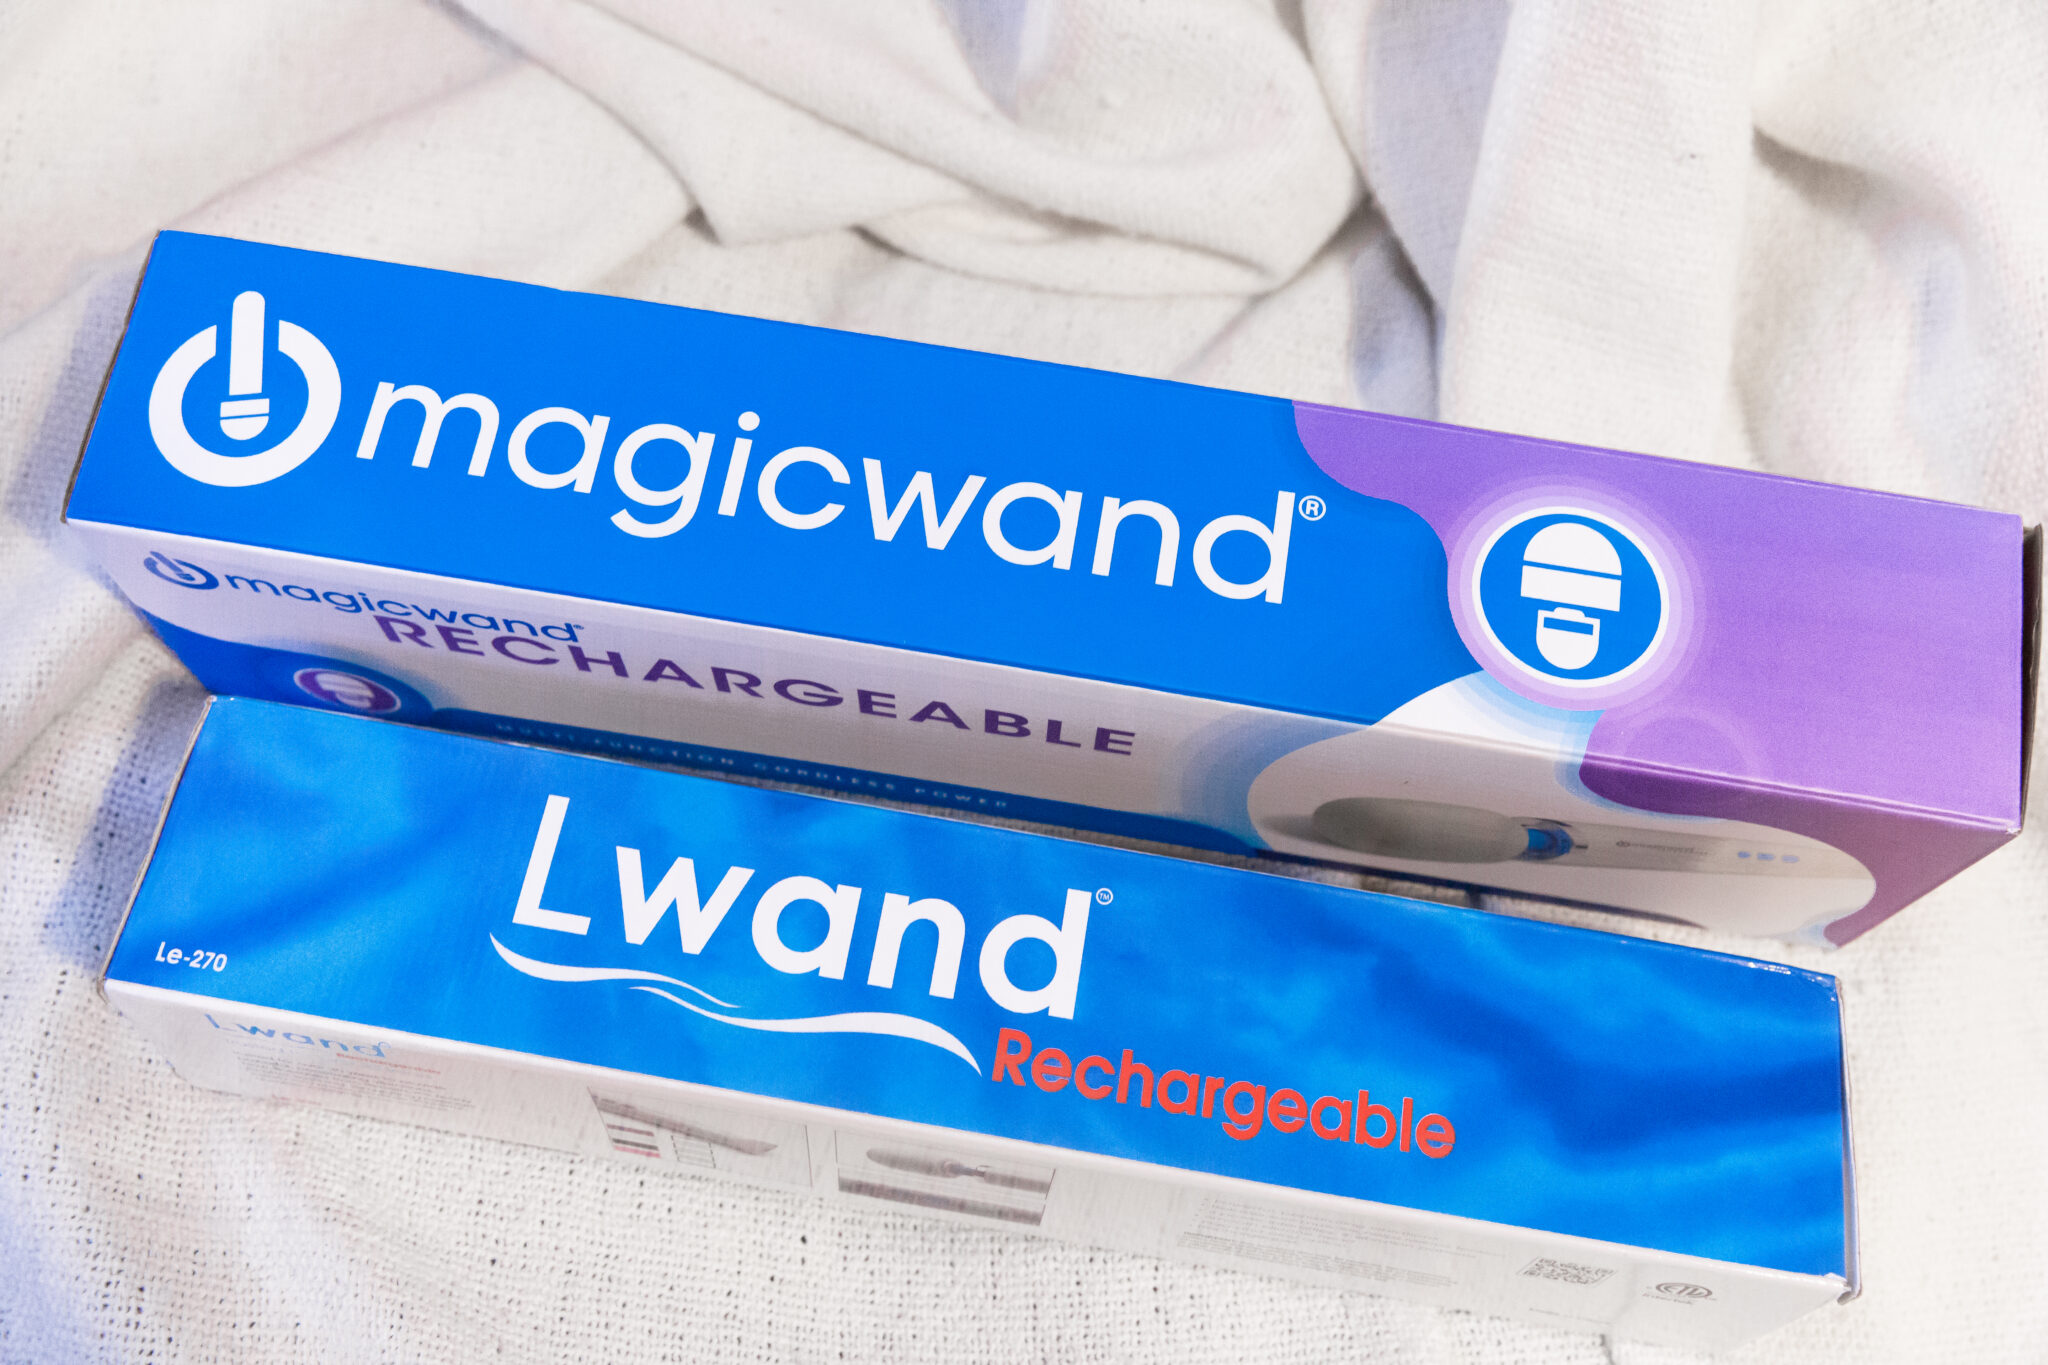 The packaging of both the authentic Magic Wand and the fake Magic Wand, branded as the "L Wand."